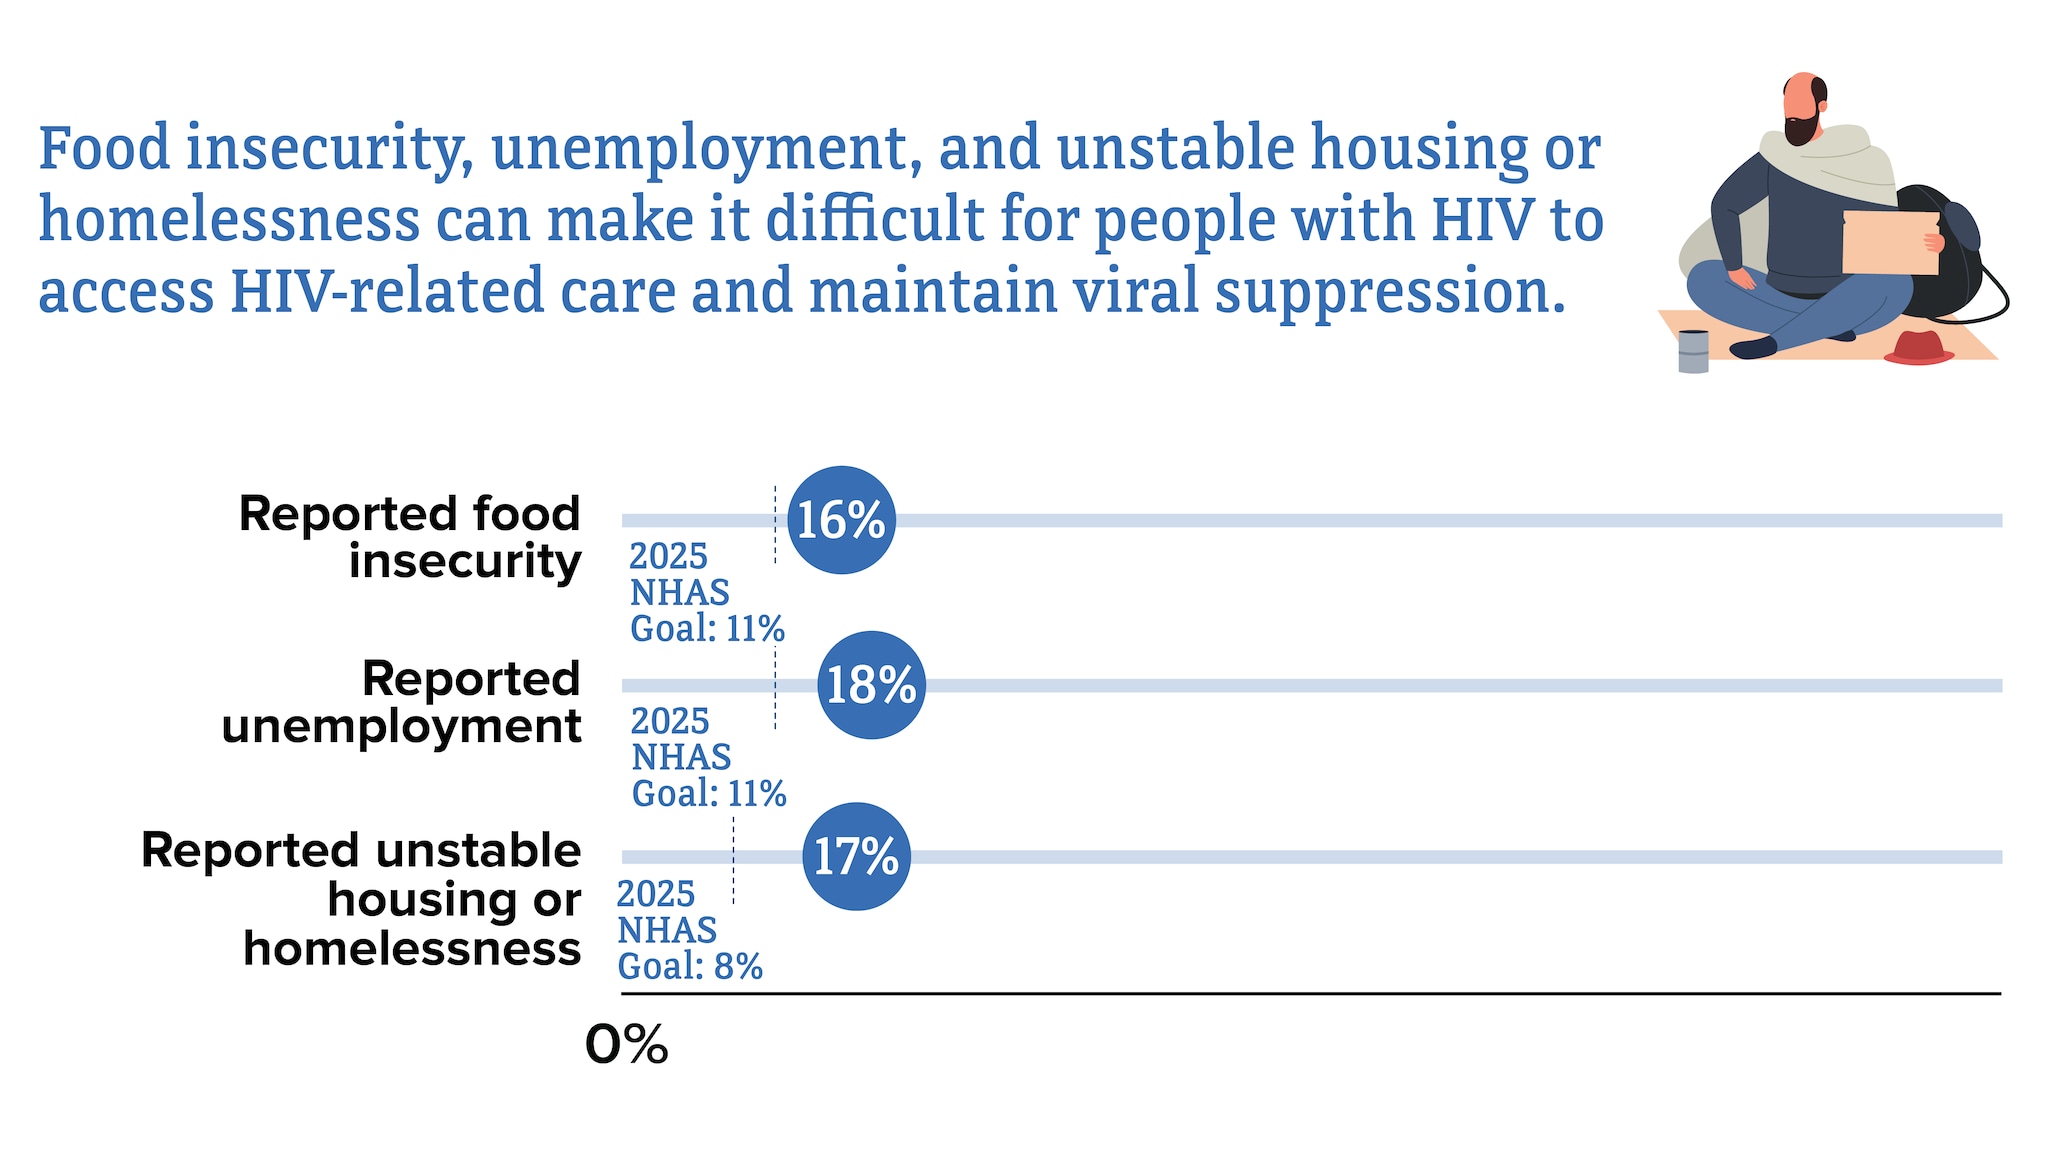 Food insecurity, unemployment, and unstable housing or homelessness can make it difficult for people with HIV to access HIV-related care and maintain viral suppression. 16 percent reported food insecurity, while the 2025 NHAS goal is 11 percent. 18 percent reported unemployment, while the 2025 NHAS goal is 11 percent. 17 percent reported unstable housing or homelessness, while the 2025 NHAS goal is 8 percent.